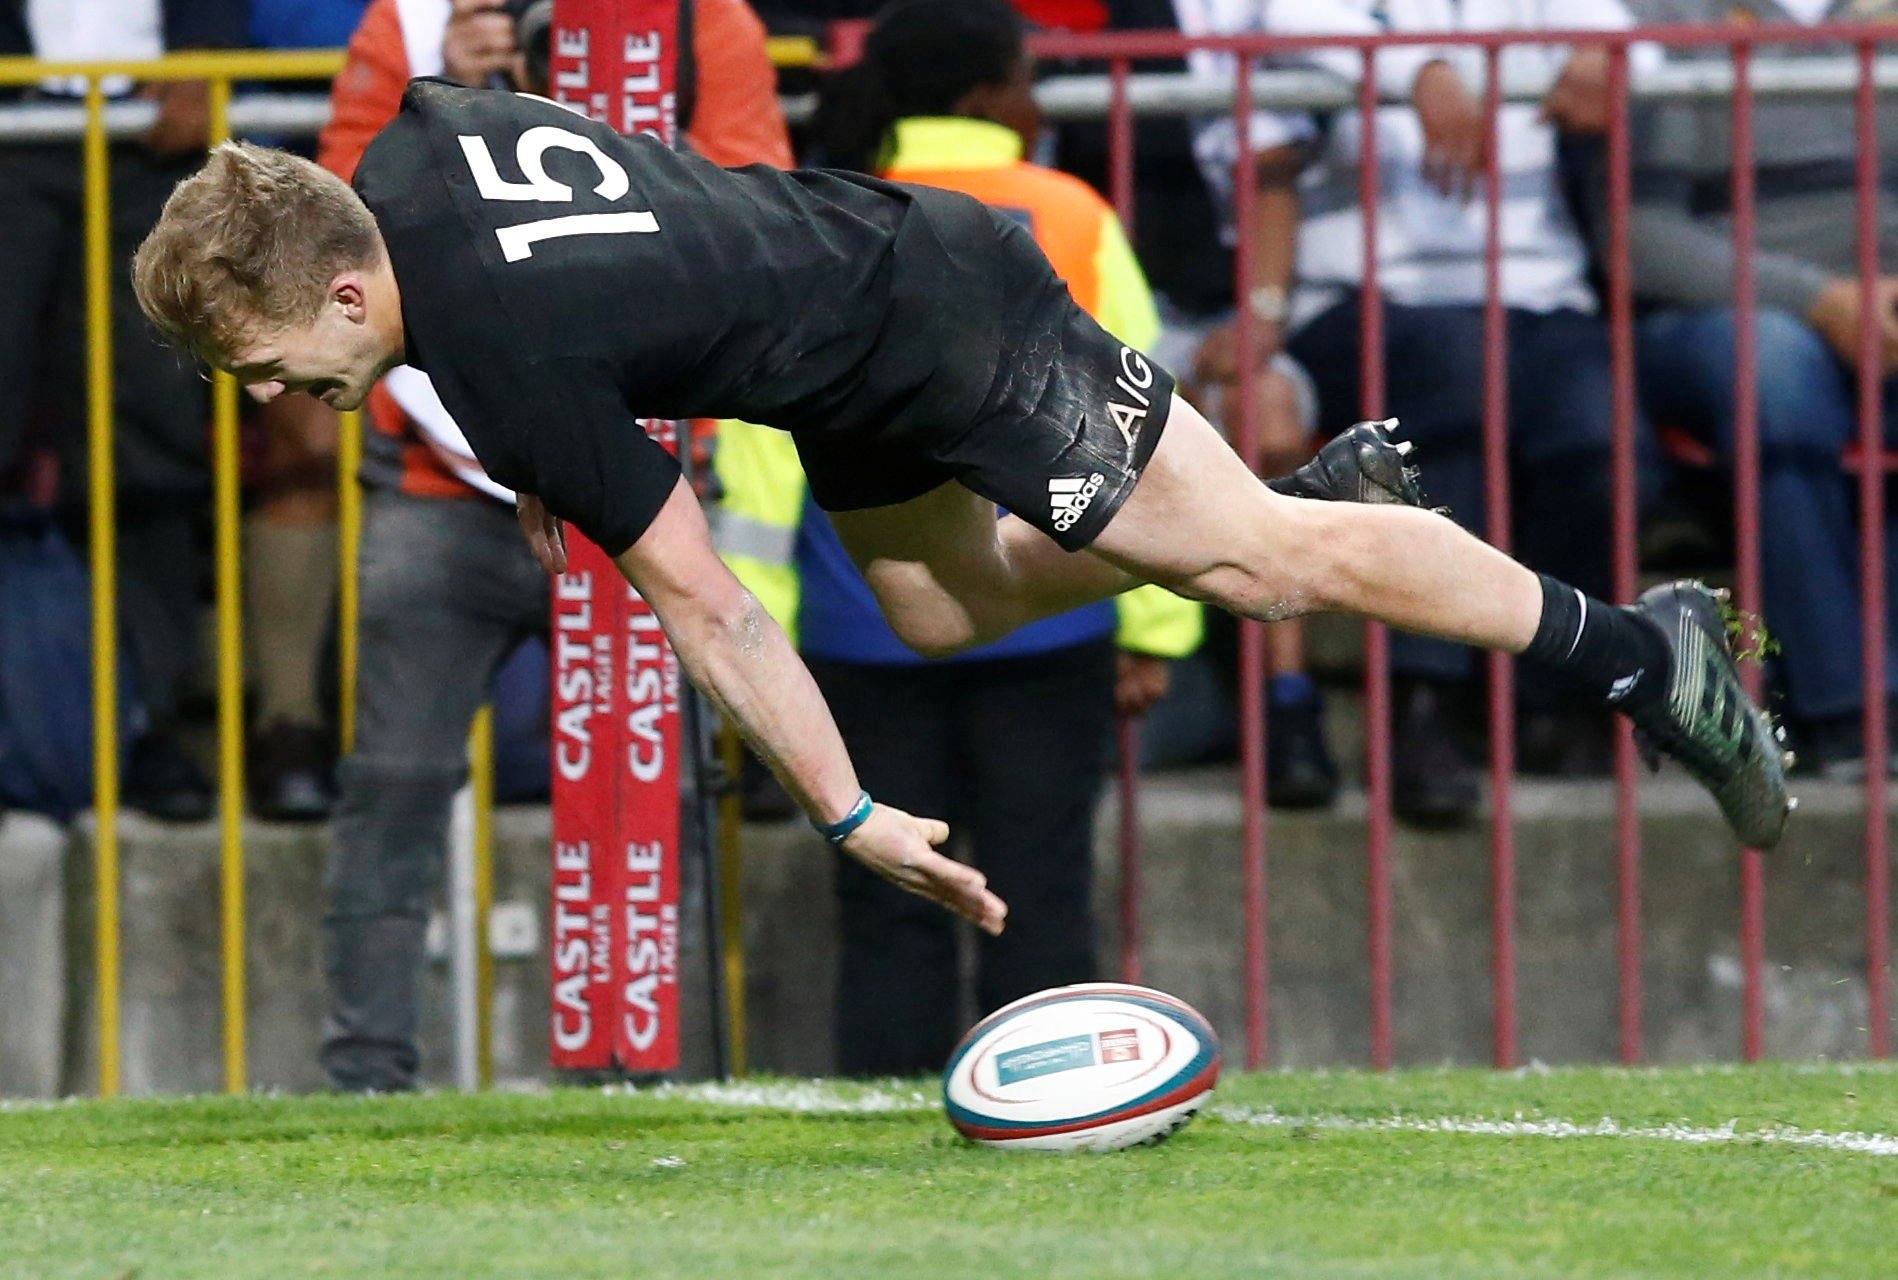 The mercurial Damian McKenzie scores the crucial try, helping the All Blacks build an eight-point advantage. Photo: Reuters